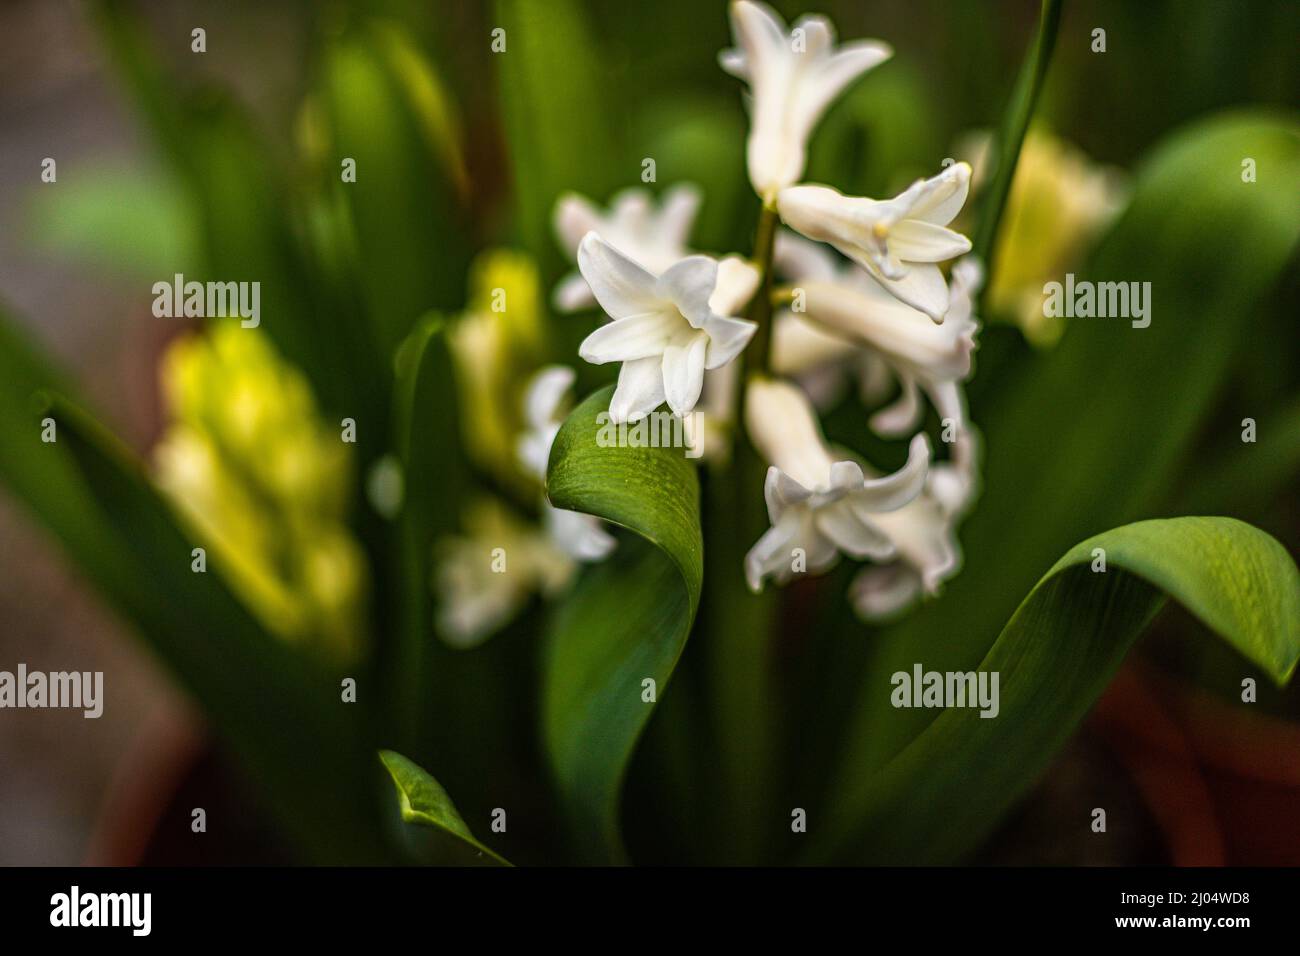 scented Hyacinthus Aiolos. Hyacinth Aiolos white flowers with green strapping foilage in a pot Stock Photo